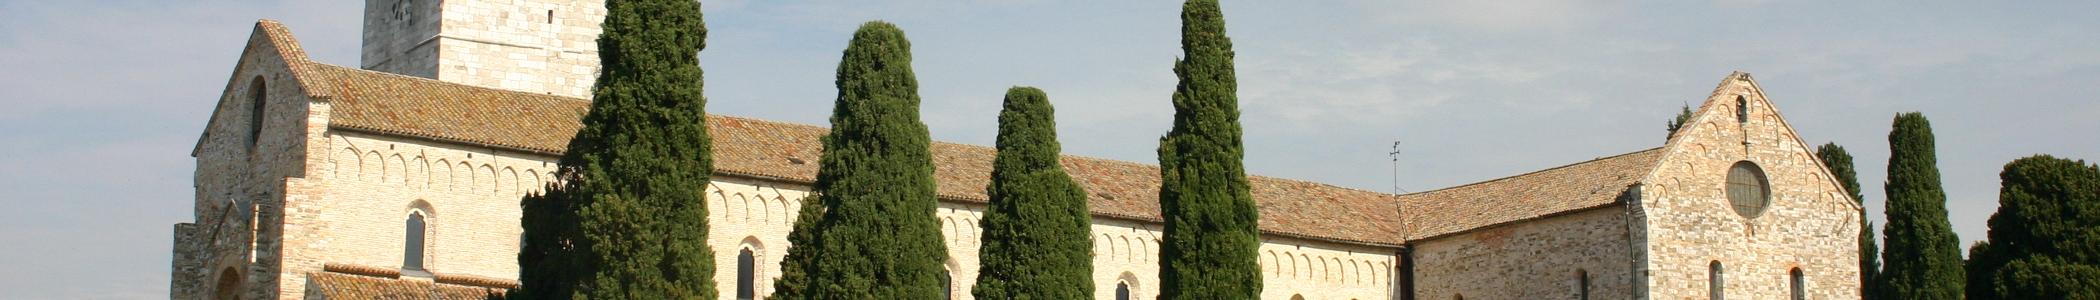 Banner image for Aquileia on GigsGuide